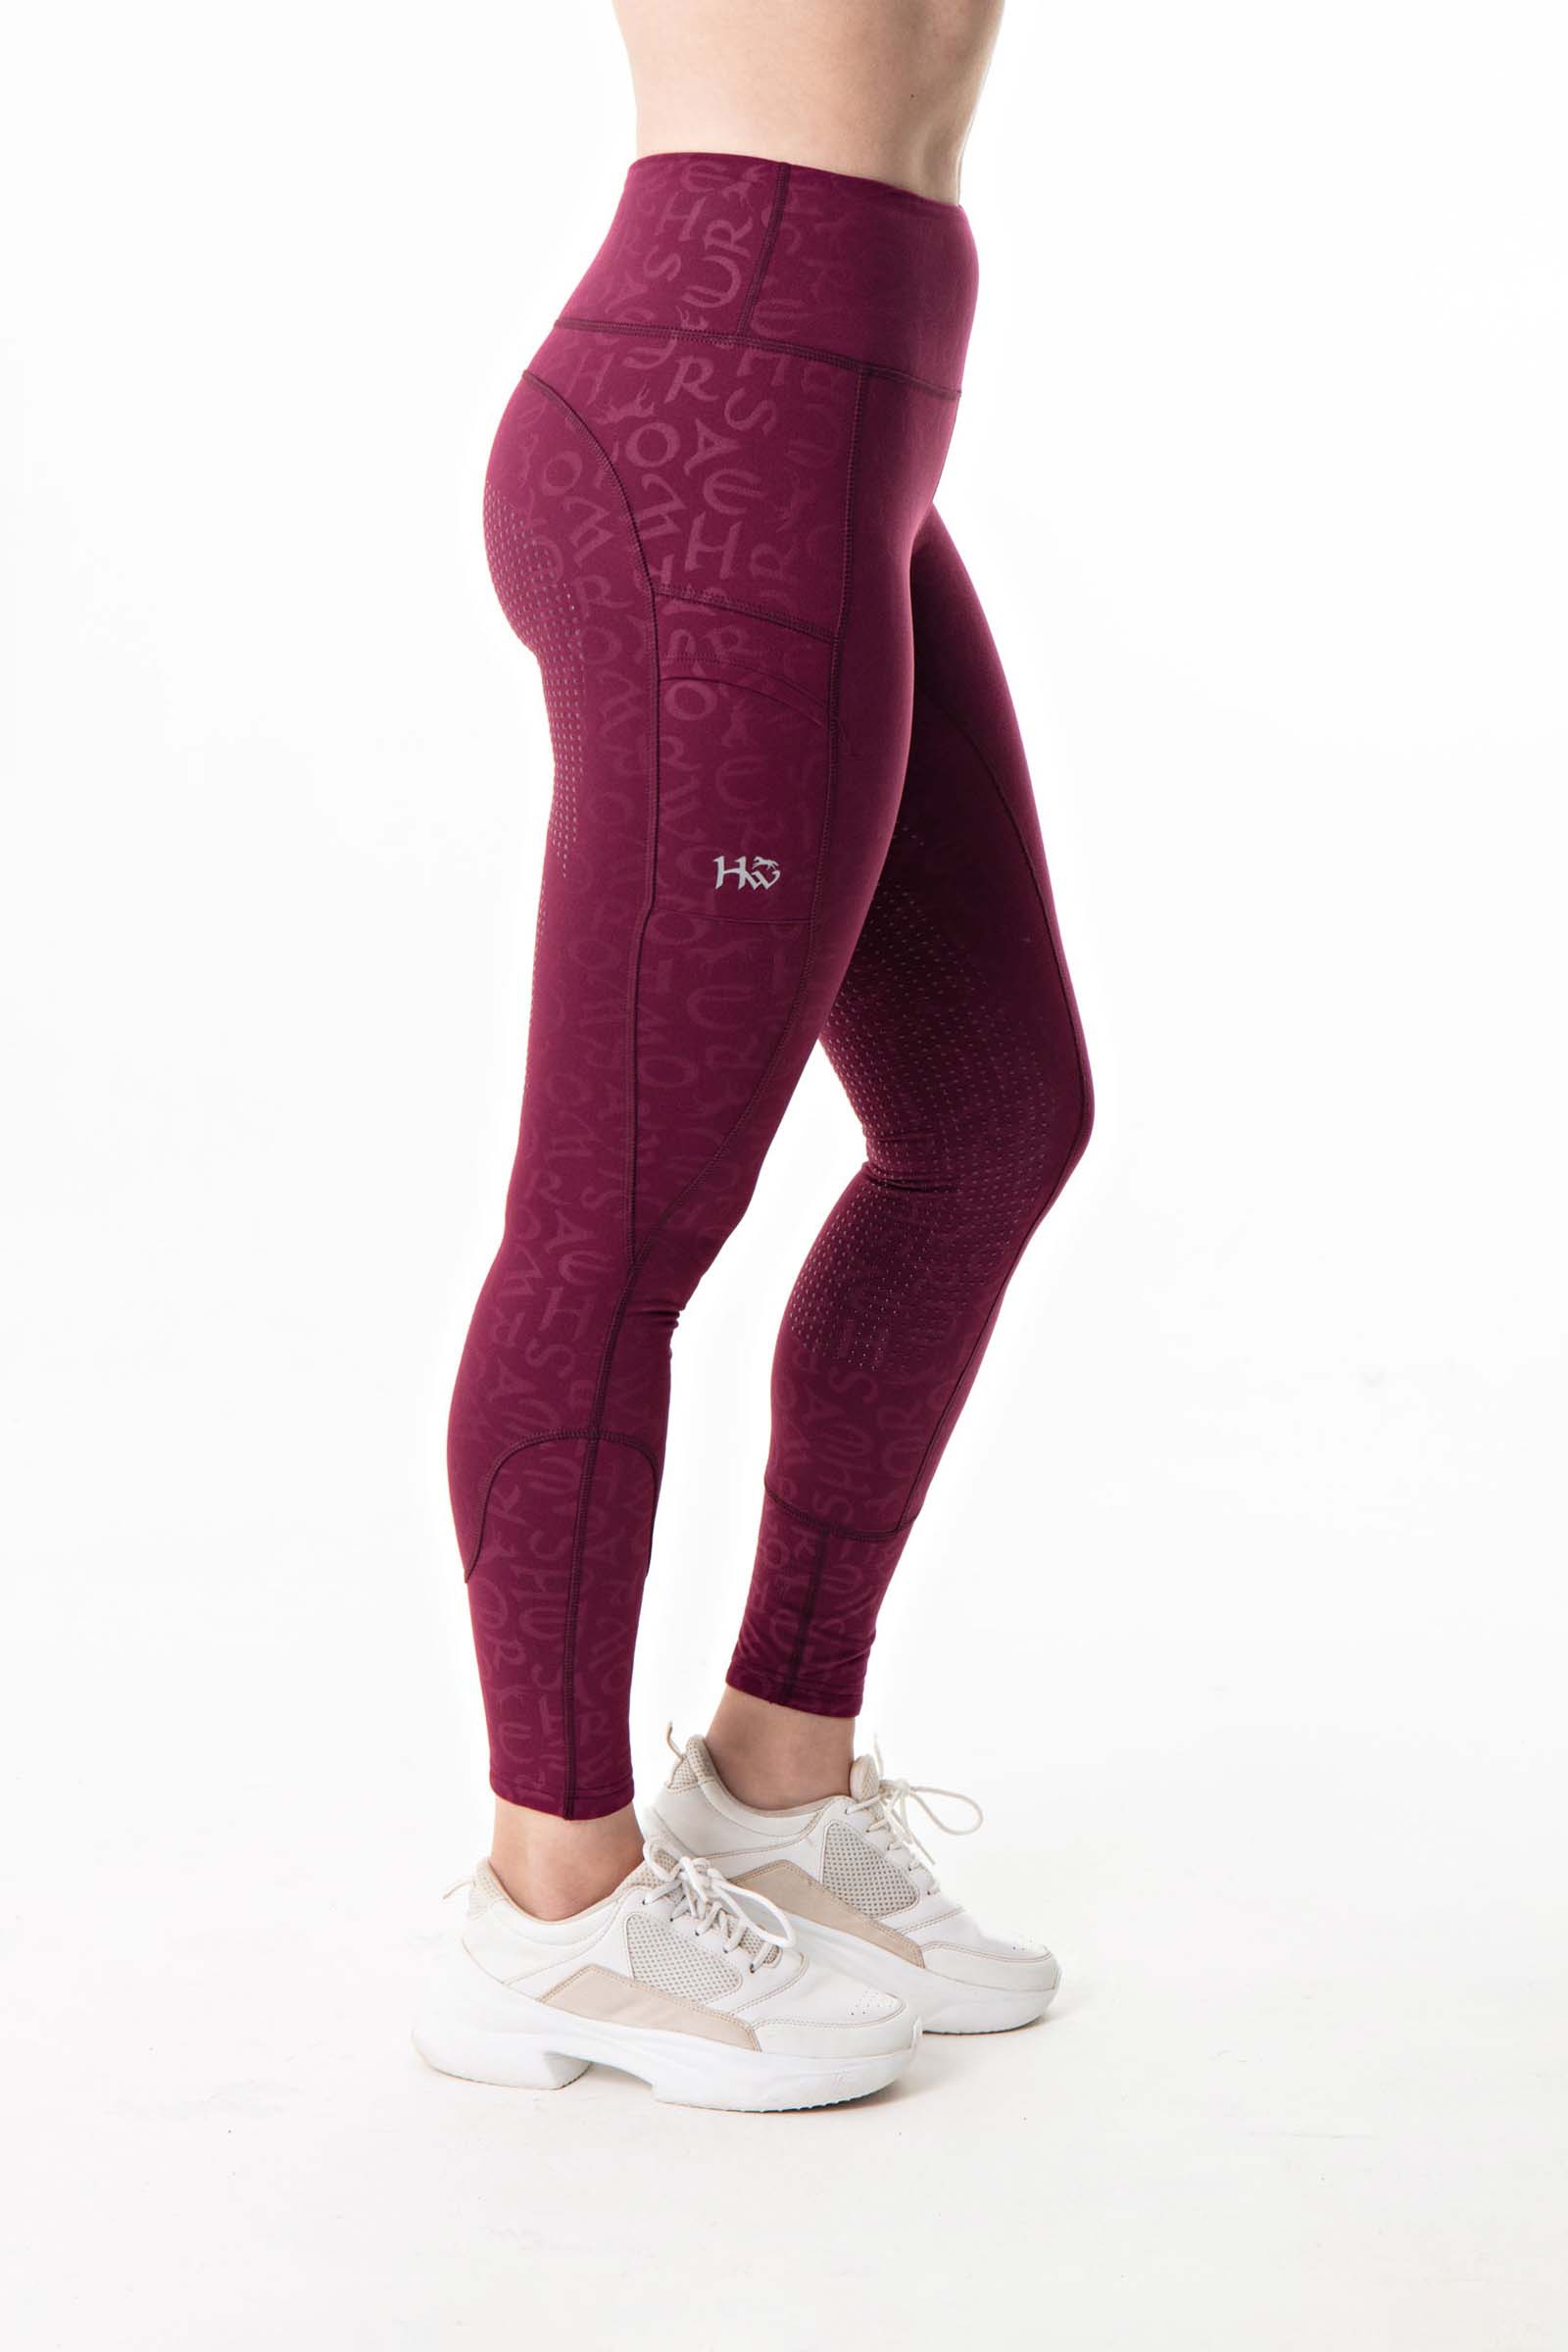 WINTER Thermal Riding Tights / Leggings with phone pockets - RUBY PINK –  Eqcouture